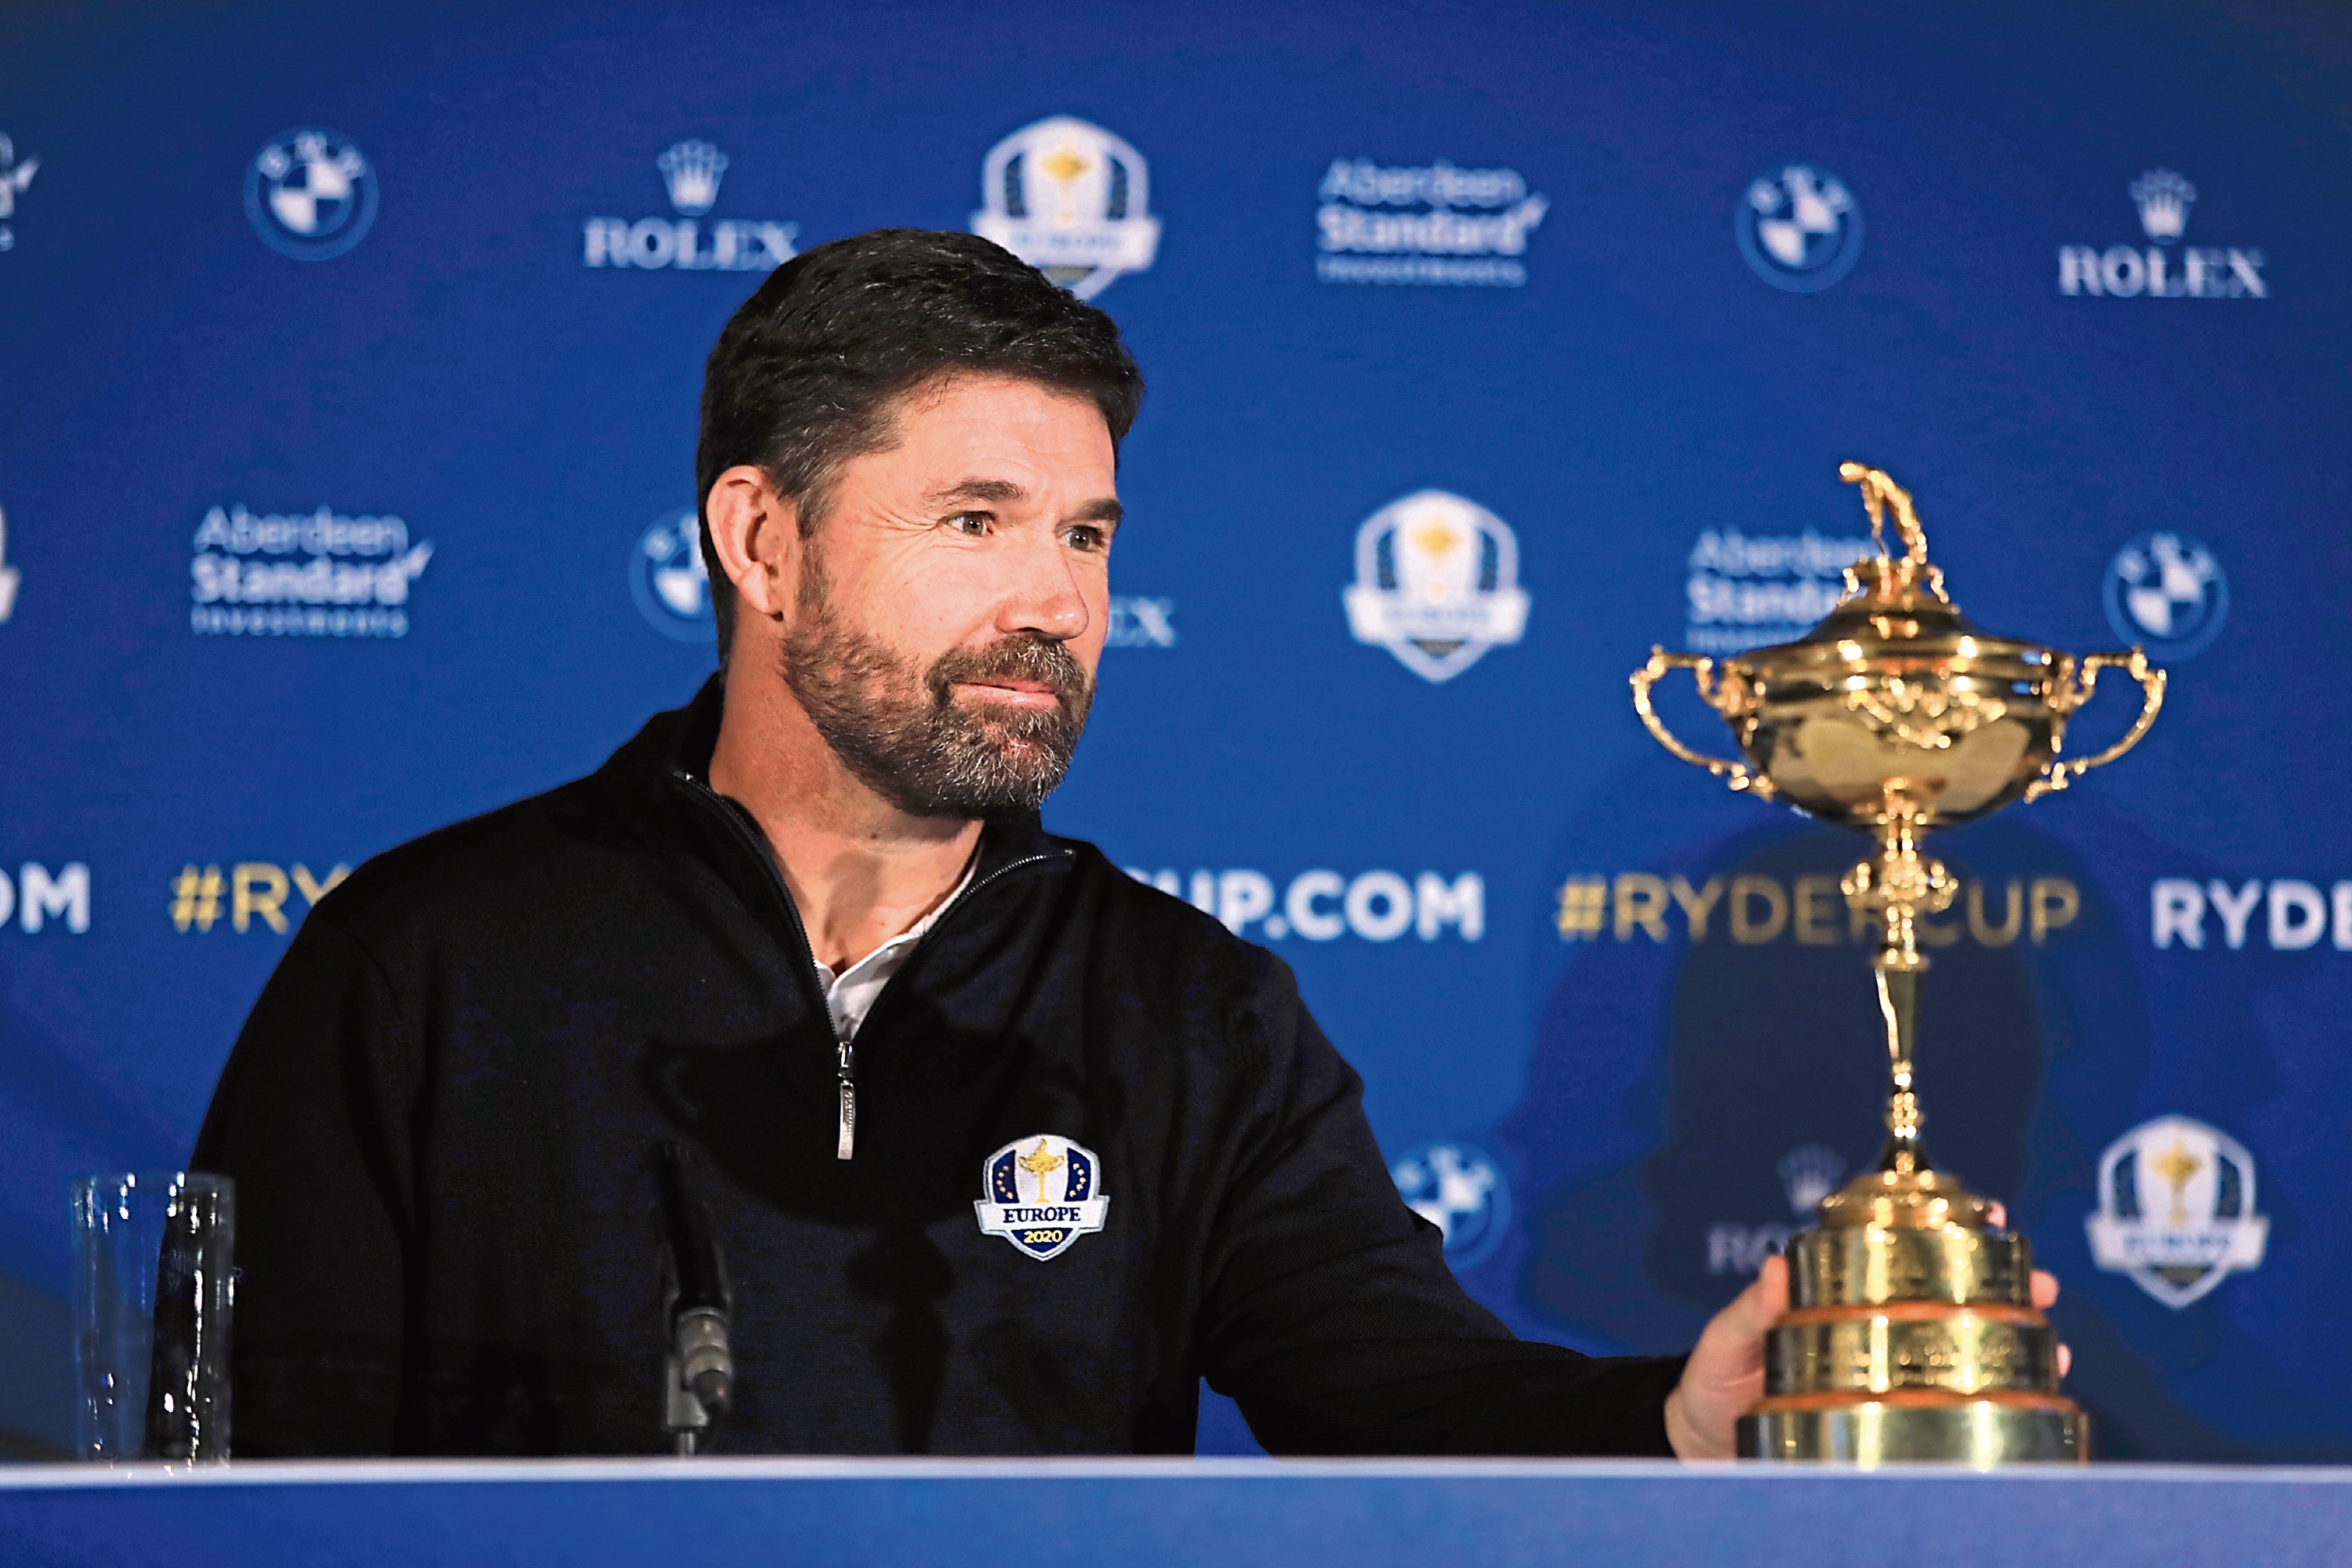 Padraig Harrington will captain Europe in the Ryder Cup in 2020.